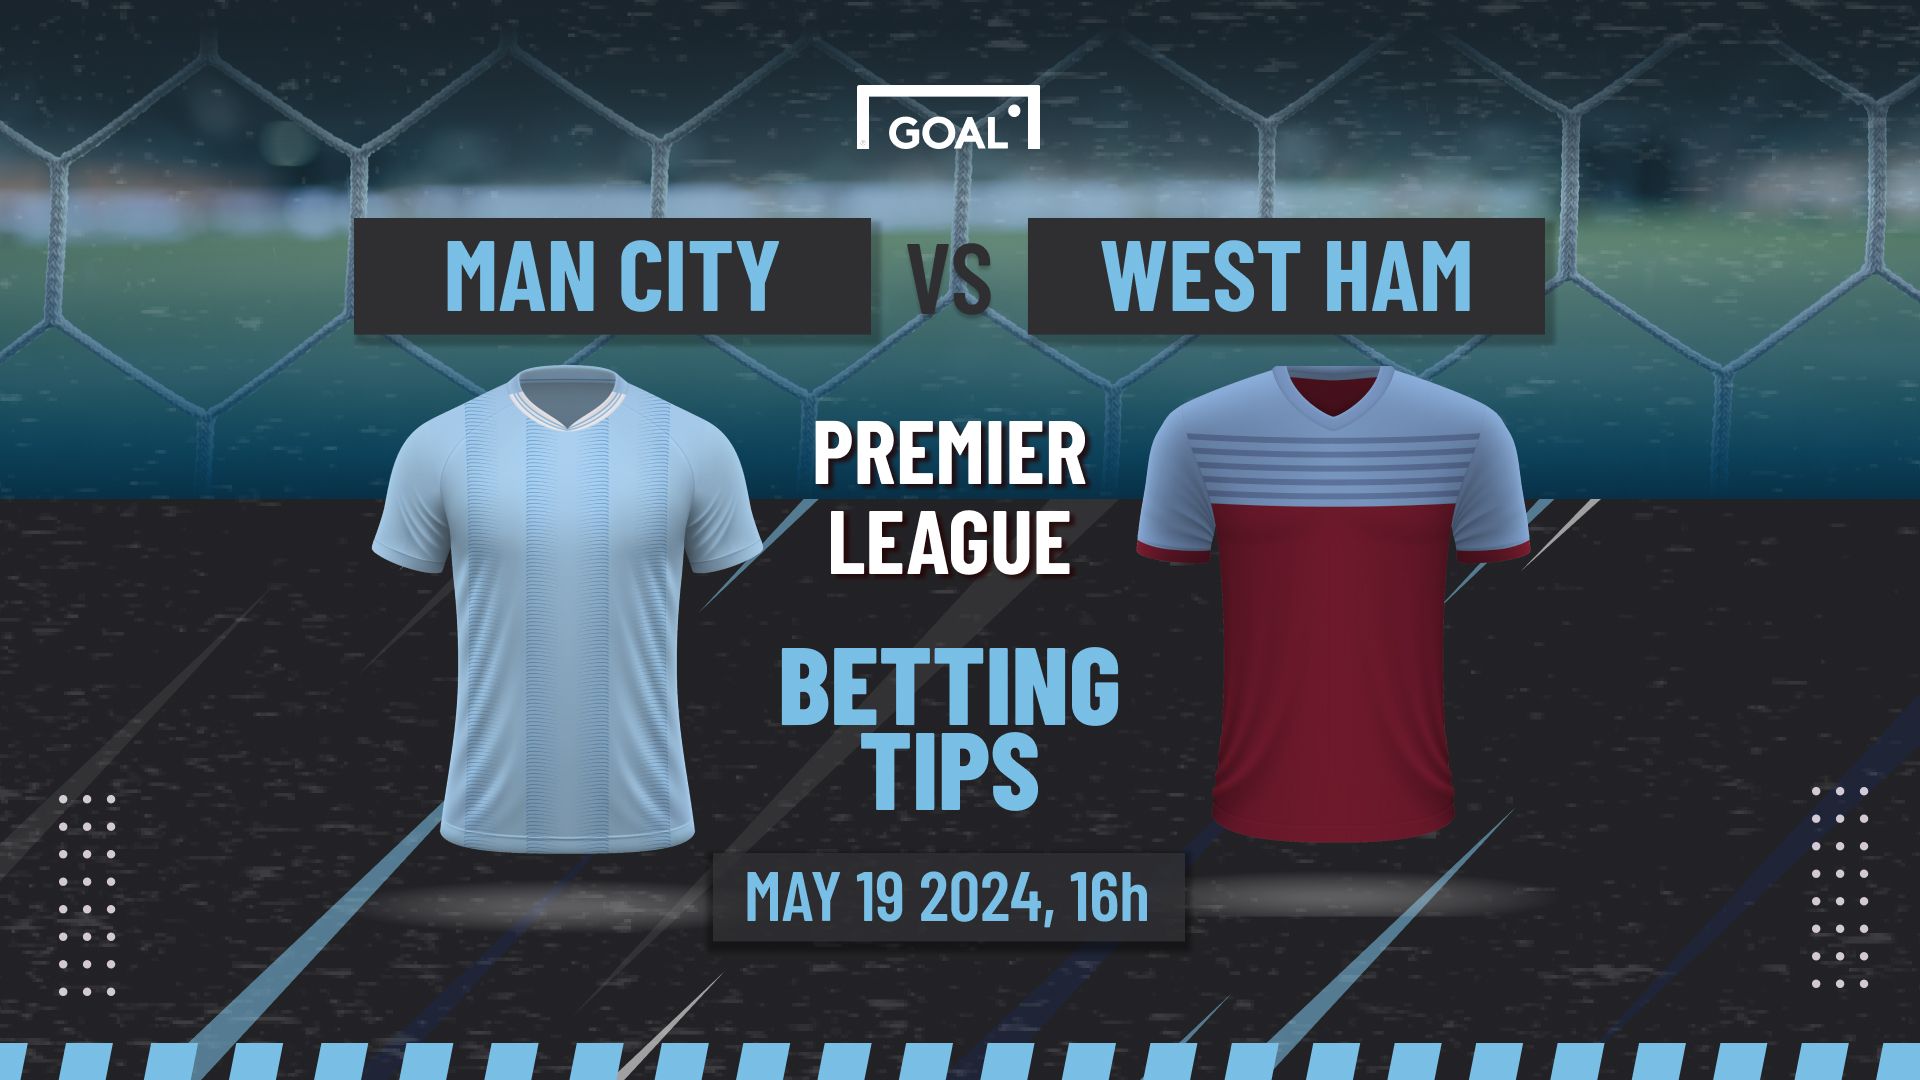 Man City vs West Ham Predictions and Betting Tips: City to take the title